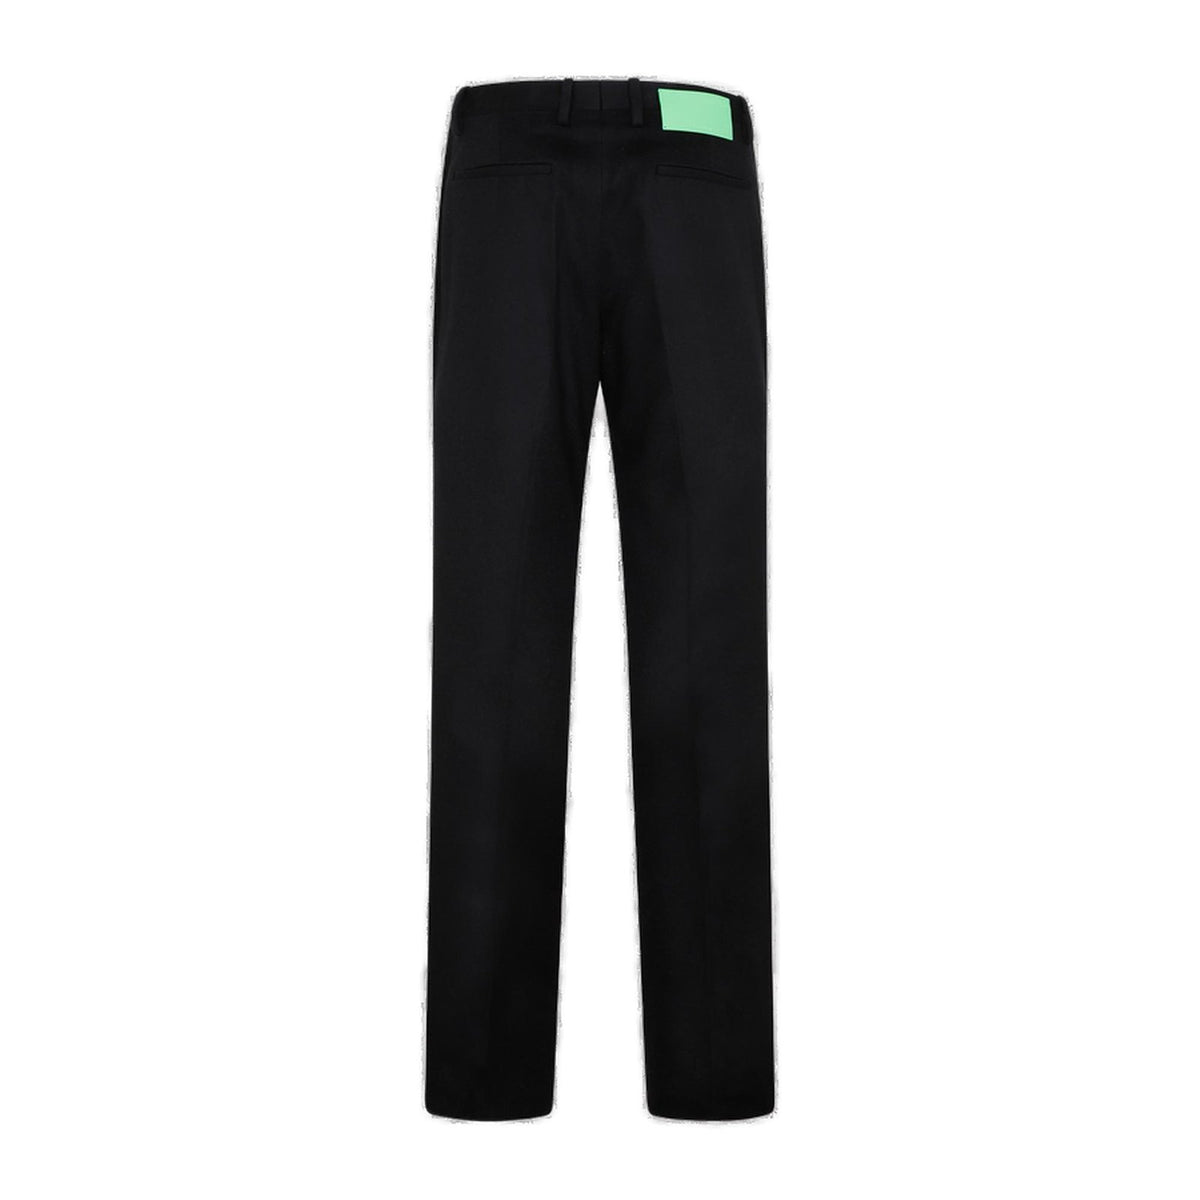 Off-White Classic Slim-Fit Pants